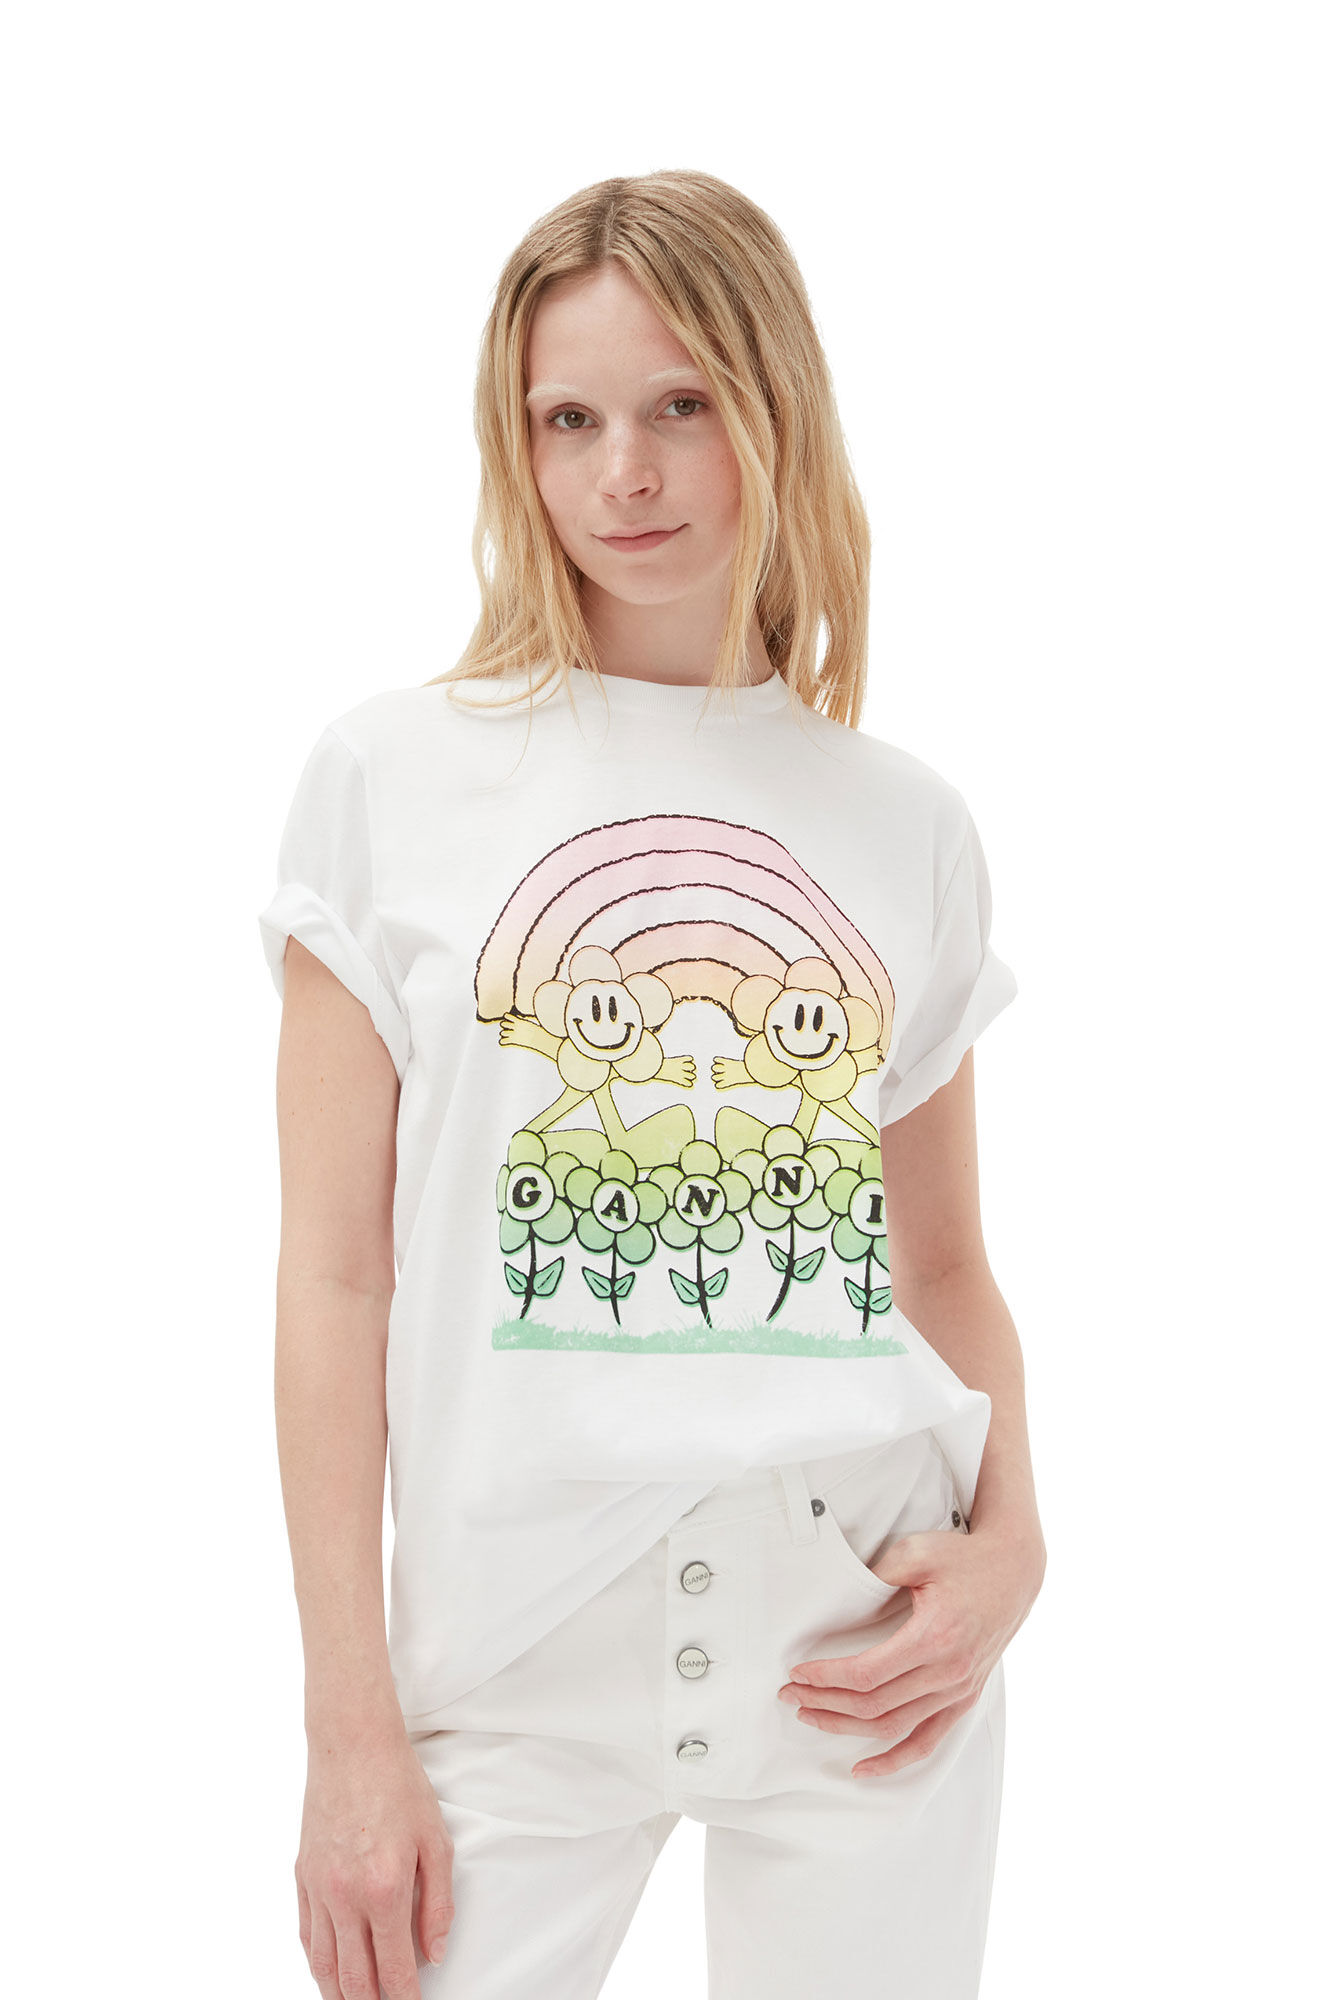 GANNI Jersey Rainbow Relaxed T-Shirt in White